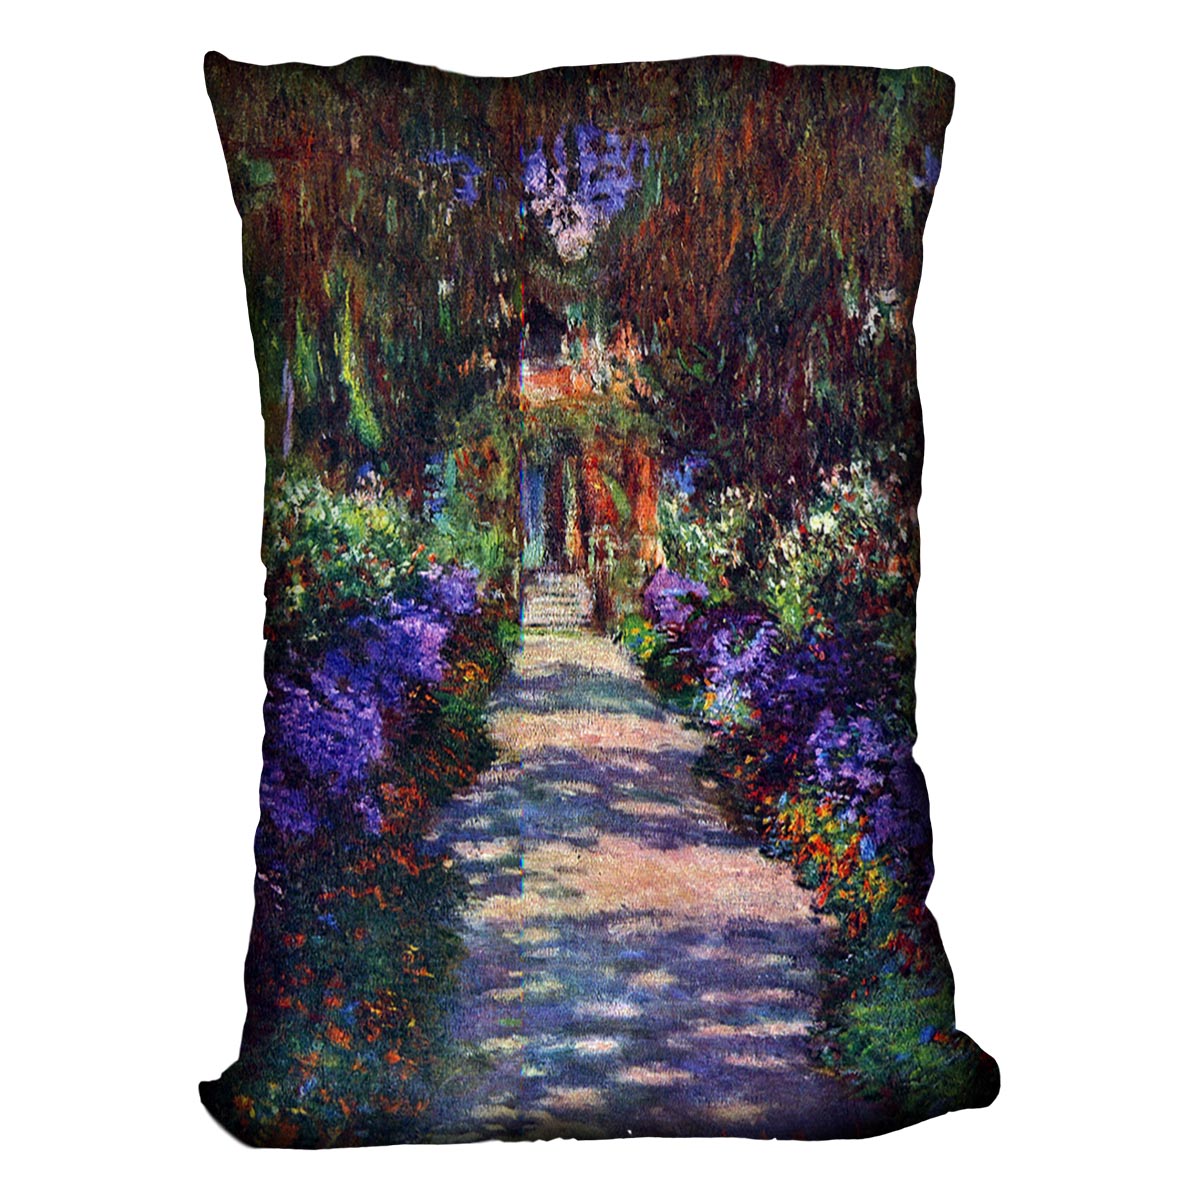 Garden at Giverny by Monet Cushion